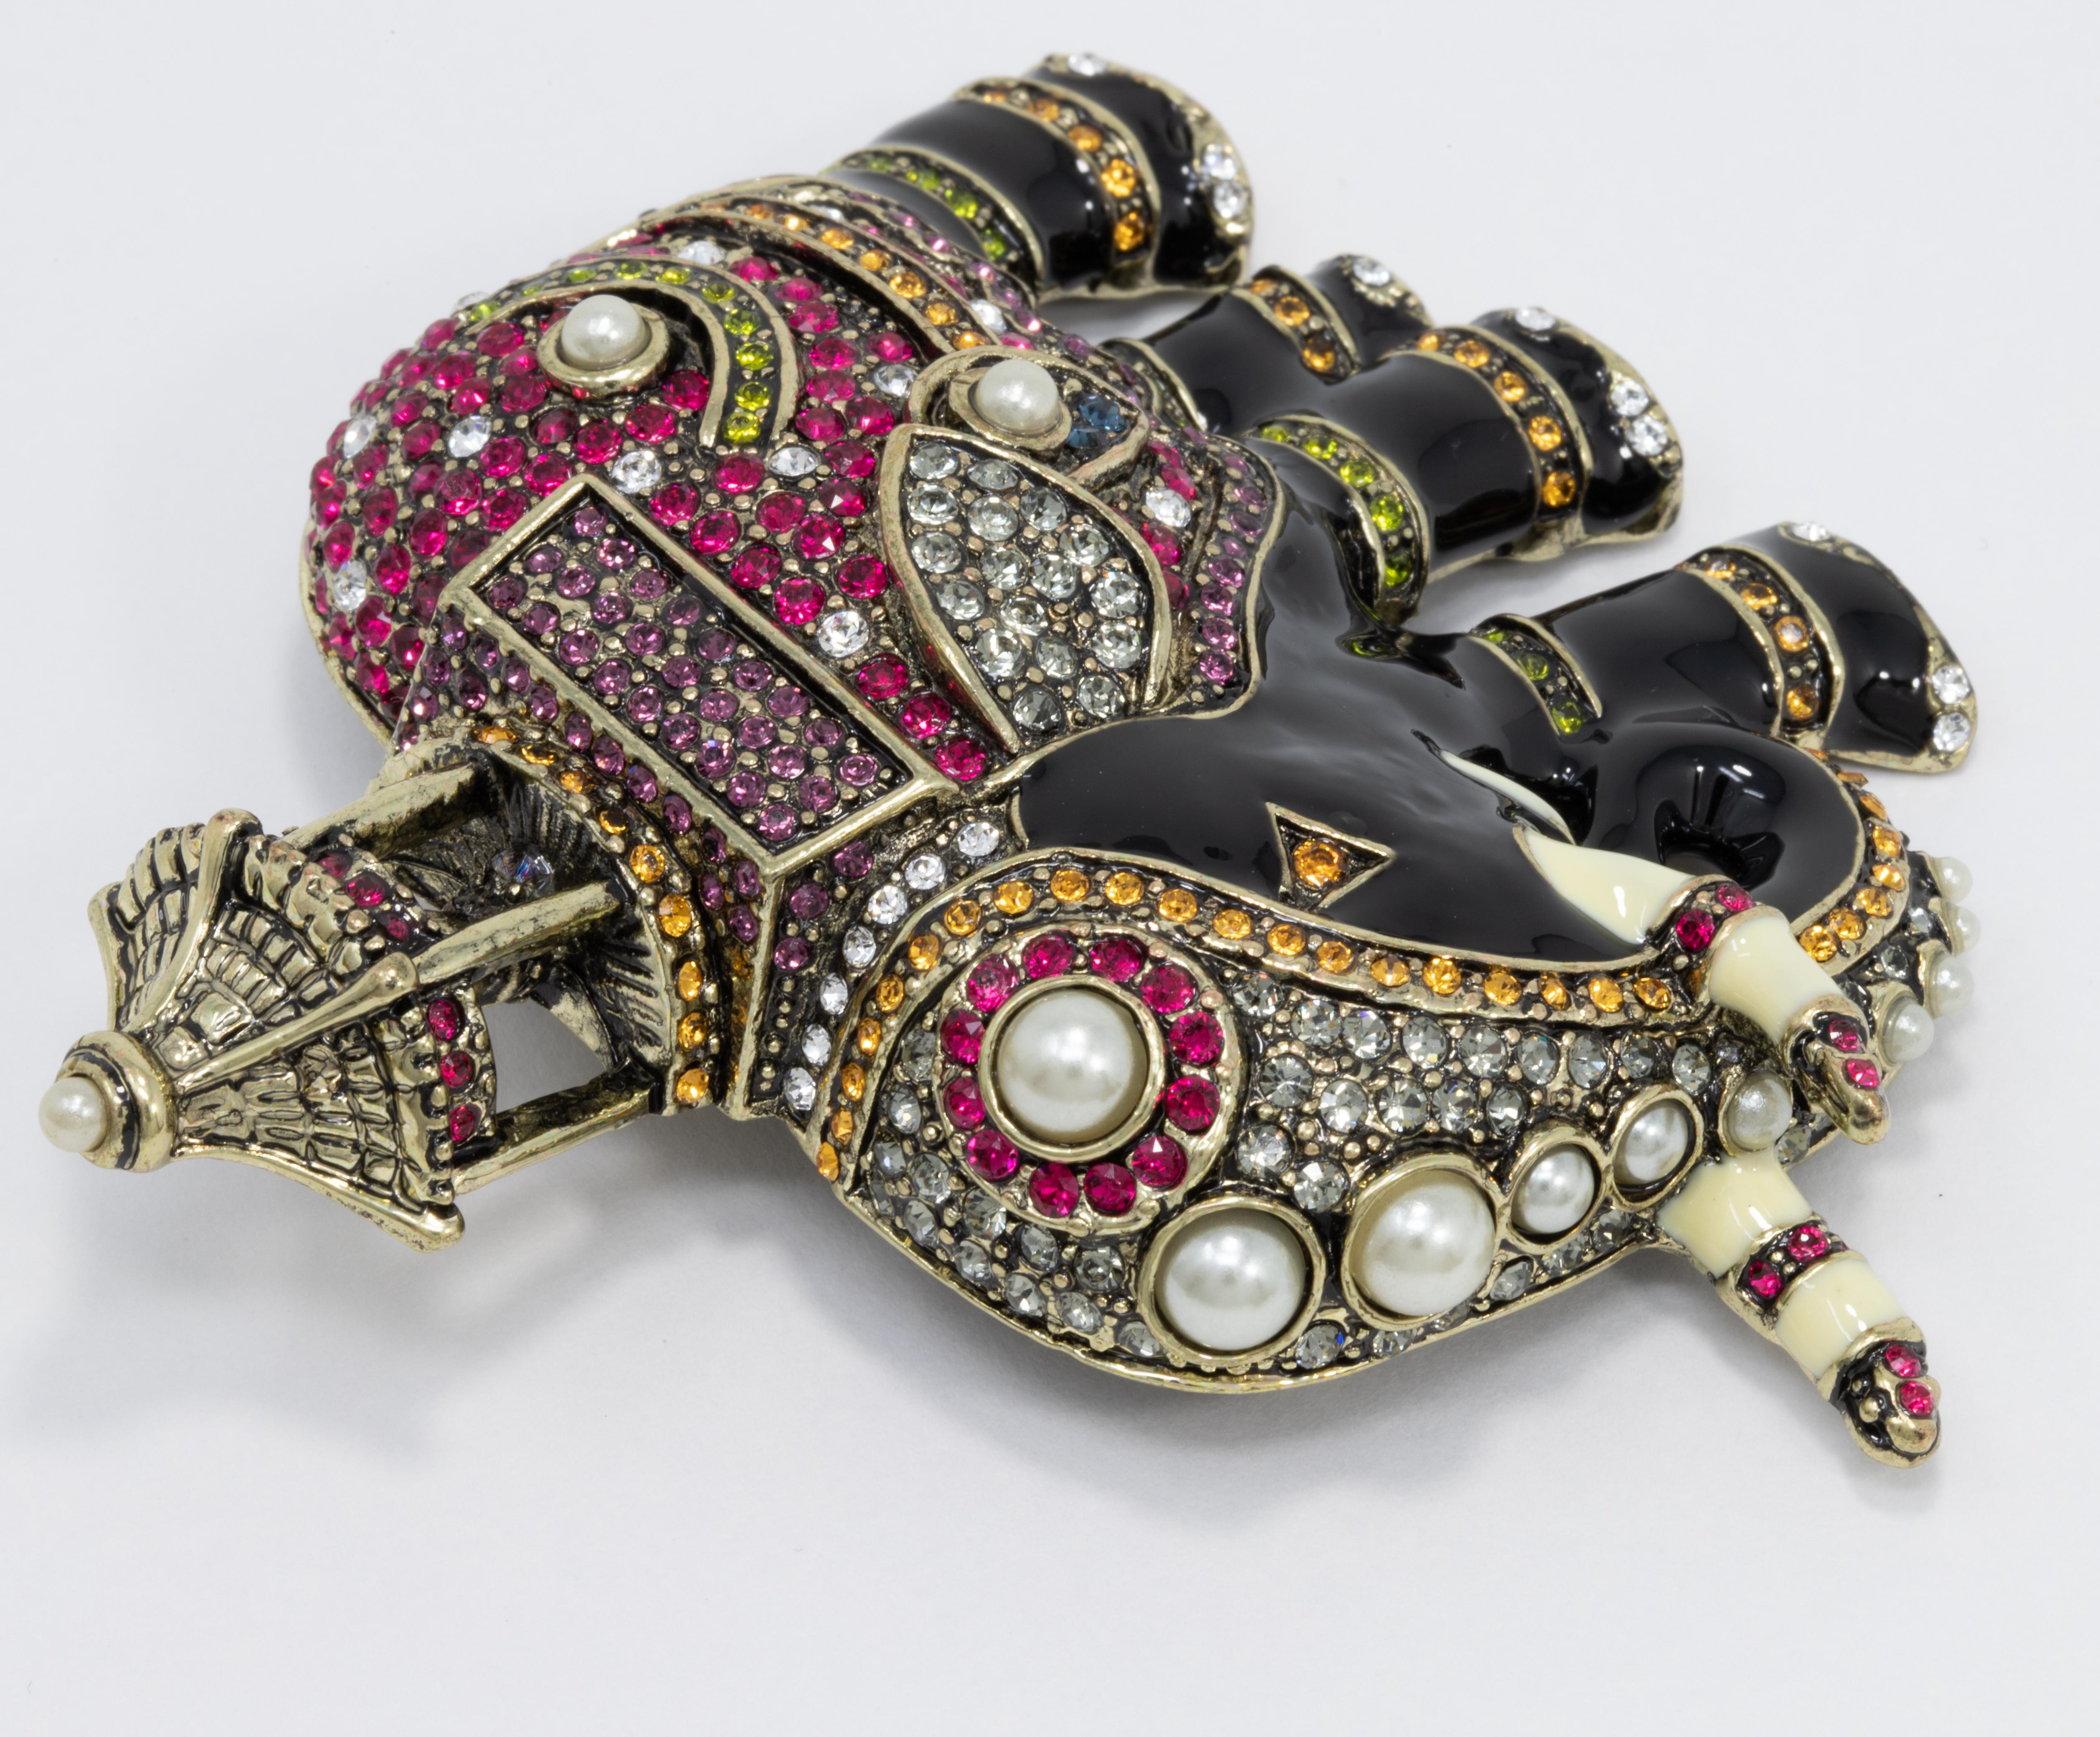 An exotic Heidi Daus pin brooch! A jeweled, enameled, elephant decorated with faux pearls and clear, tangerine, rose, and olivine crystals.

Marks / hallmarks / etc: Heidi Daus, China